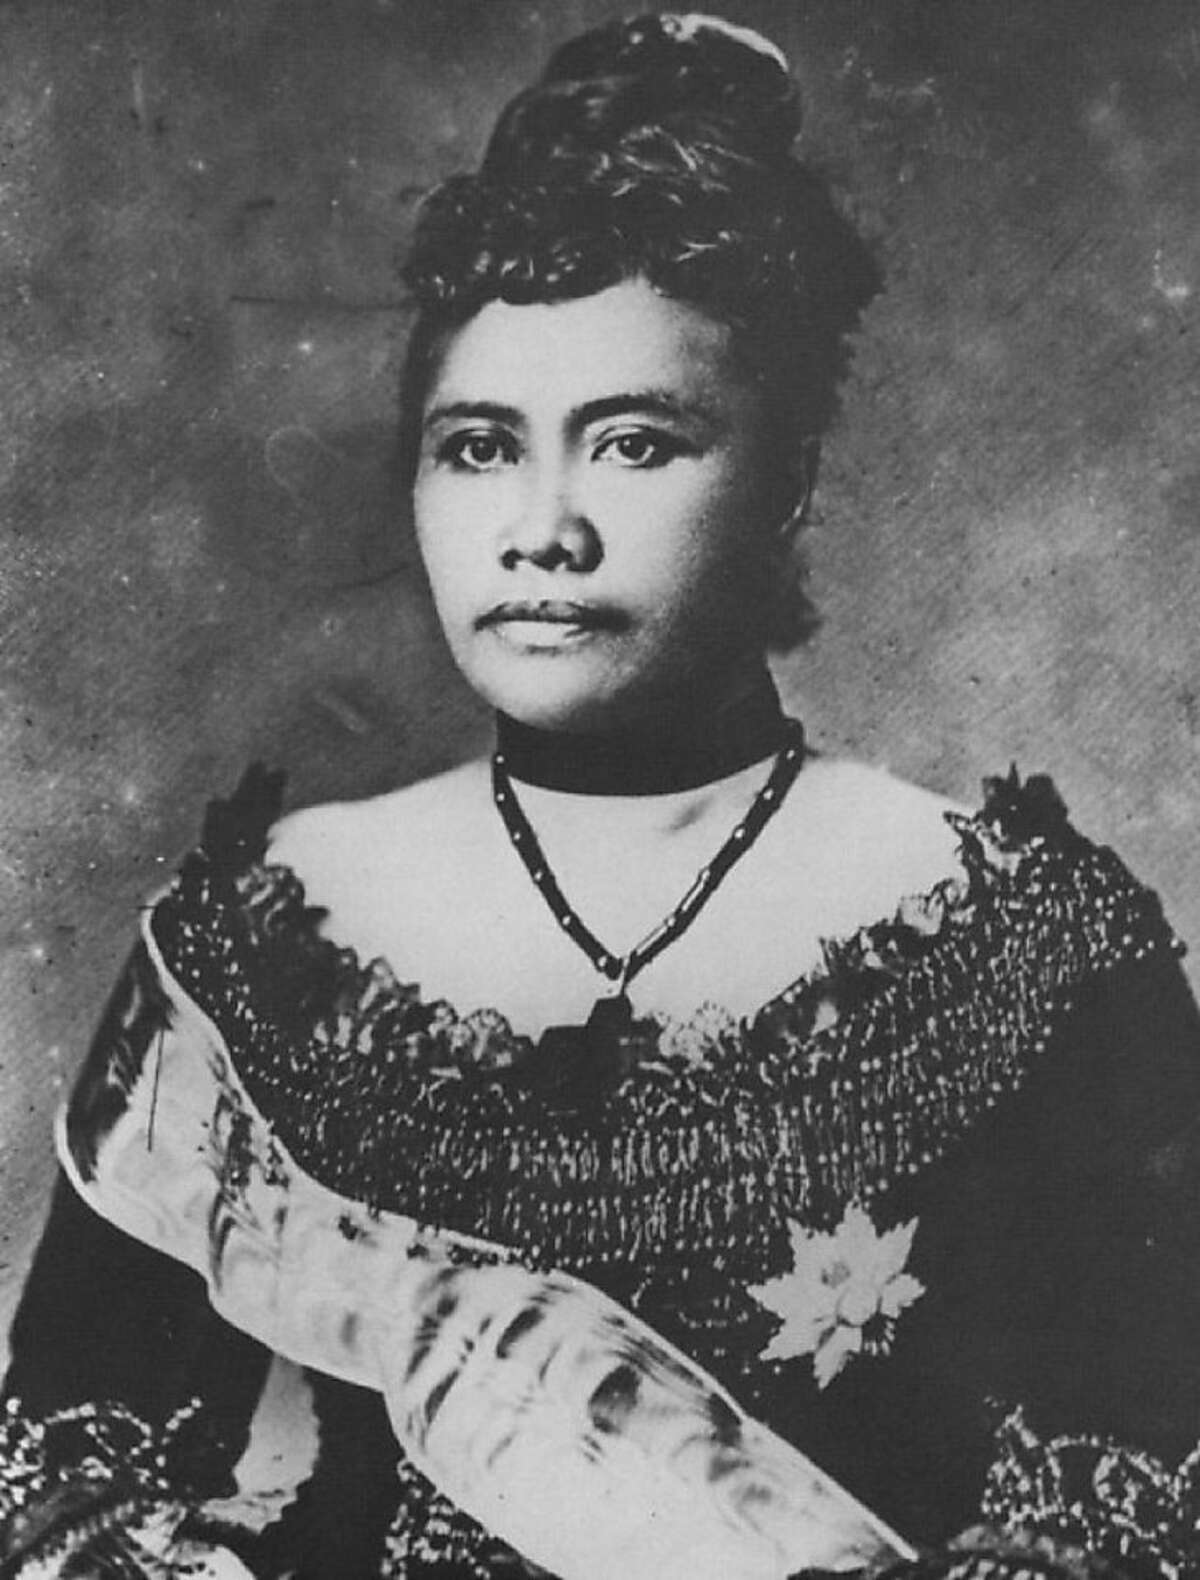 Lili'uokalani, before she became Hawaii's last queen, in a portrait from the 1870s.